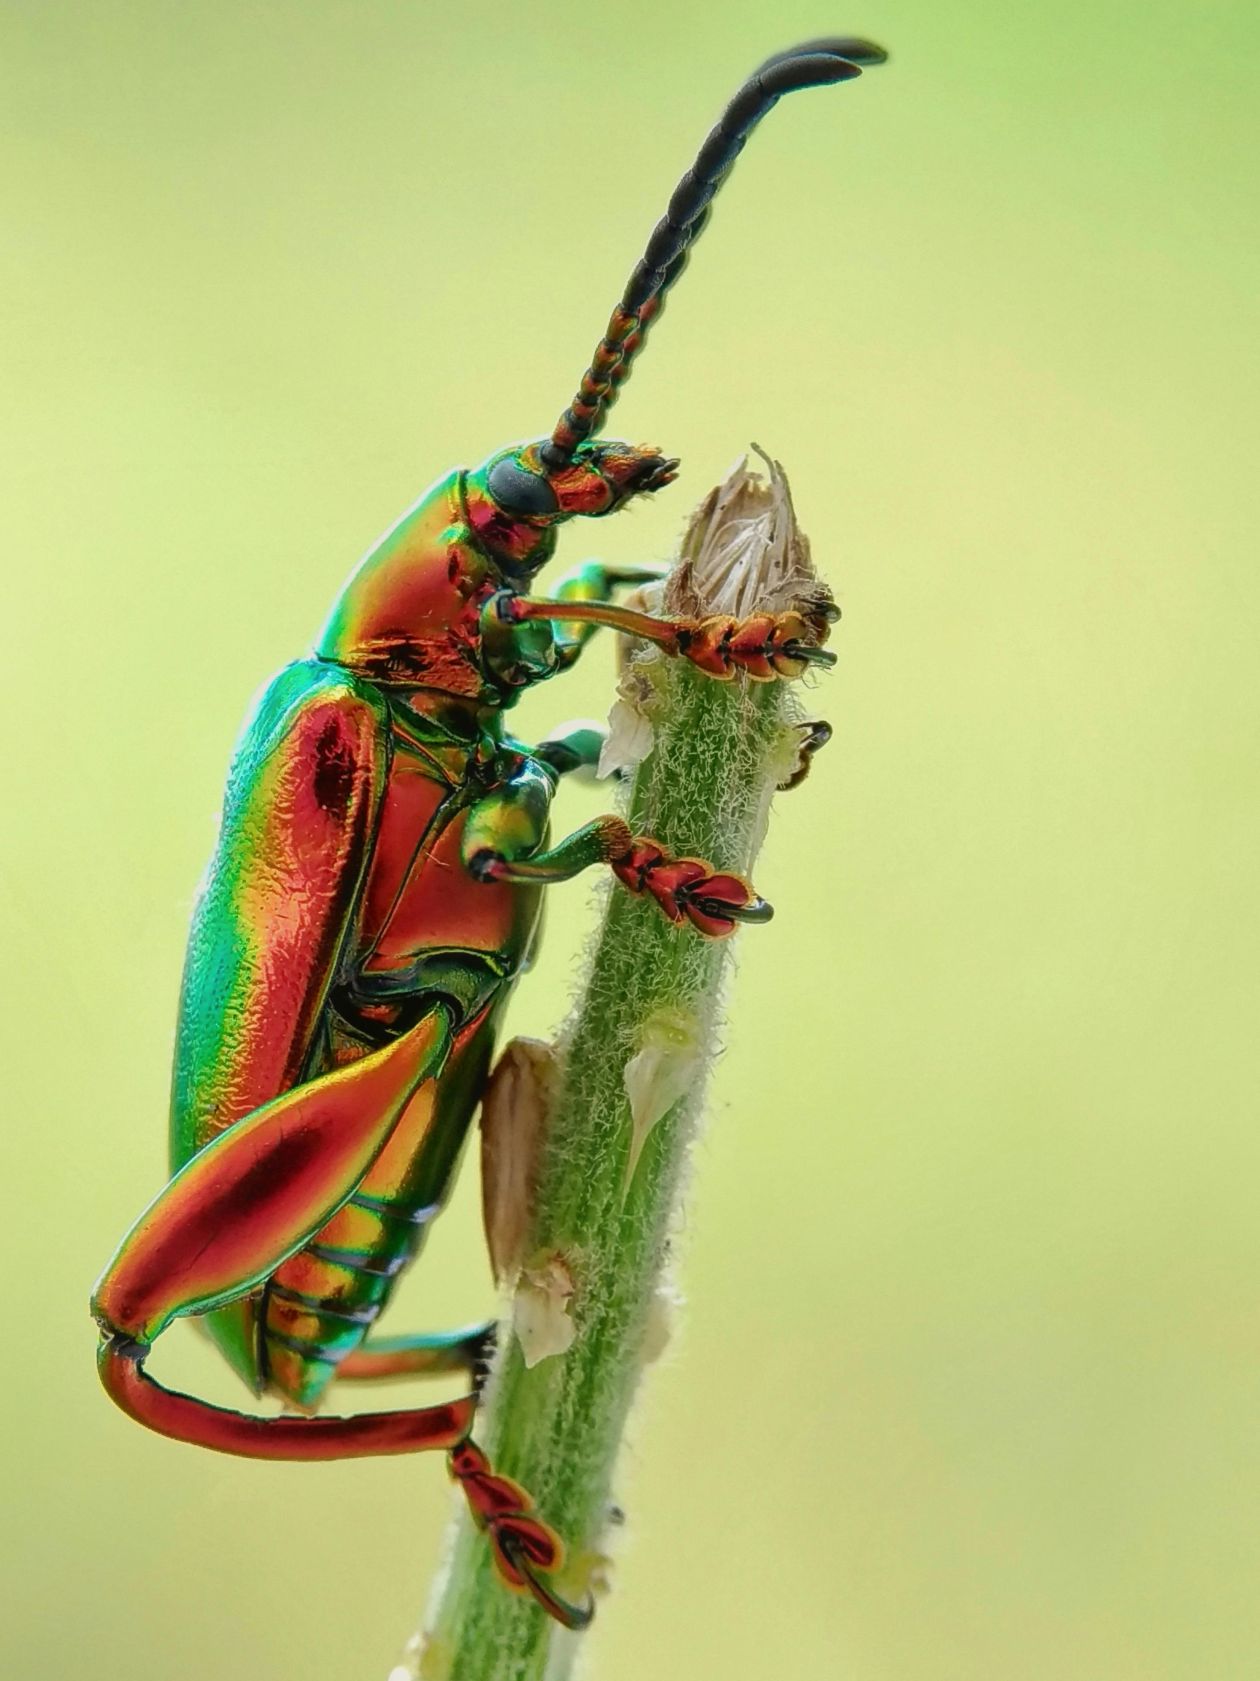 Close up of beetle on a branch